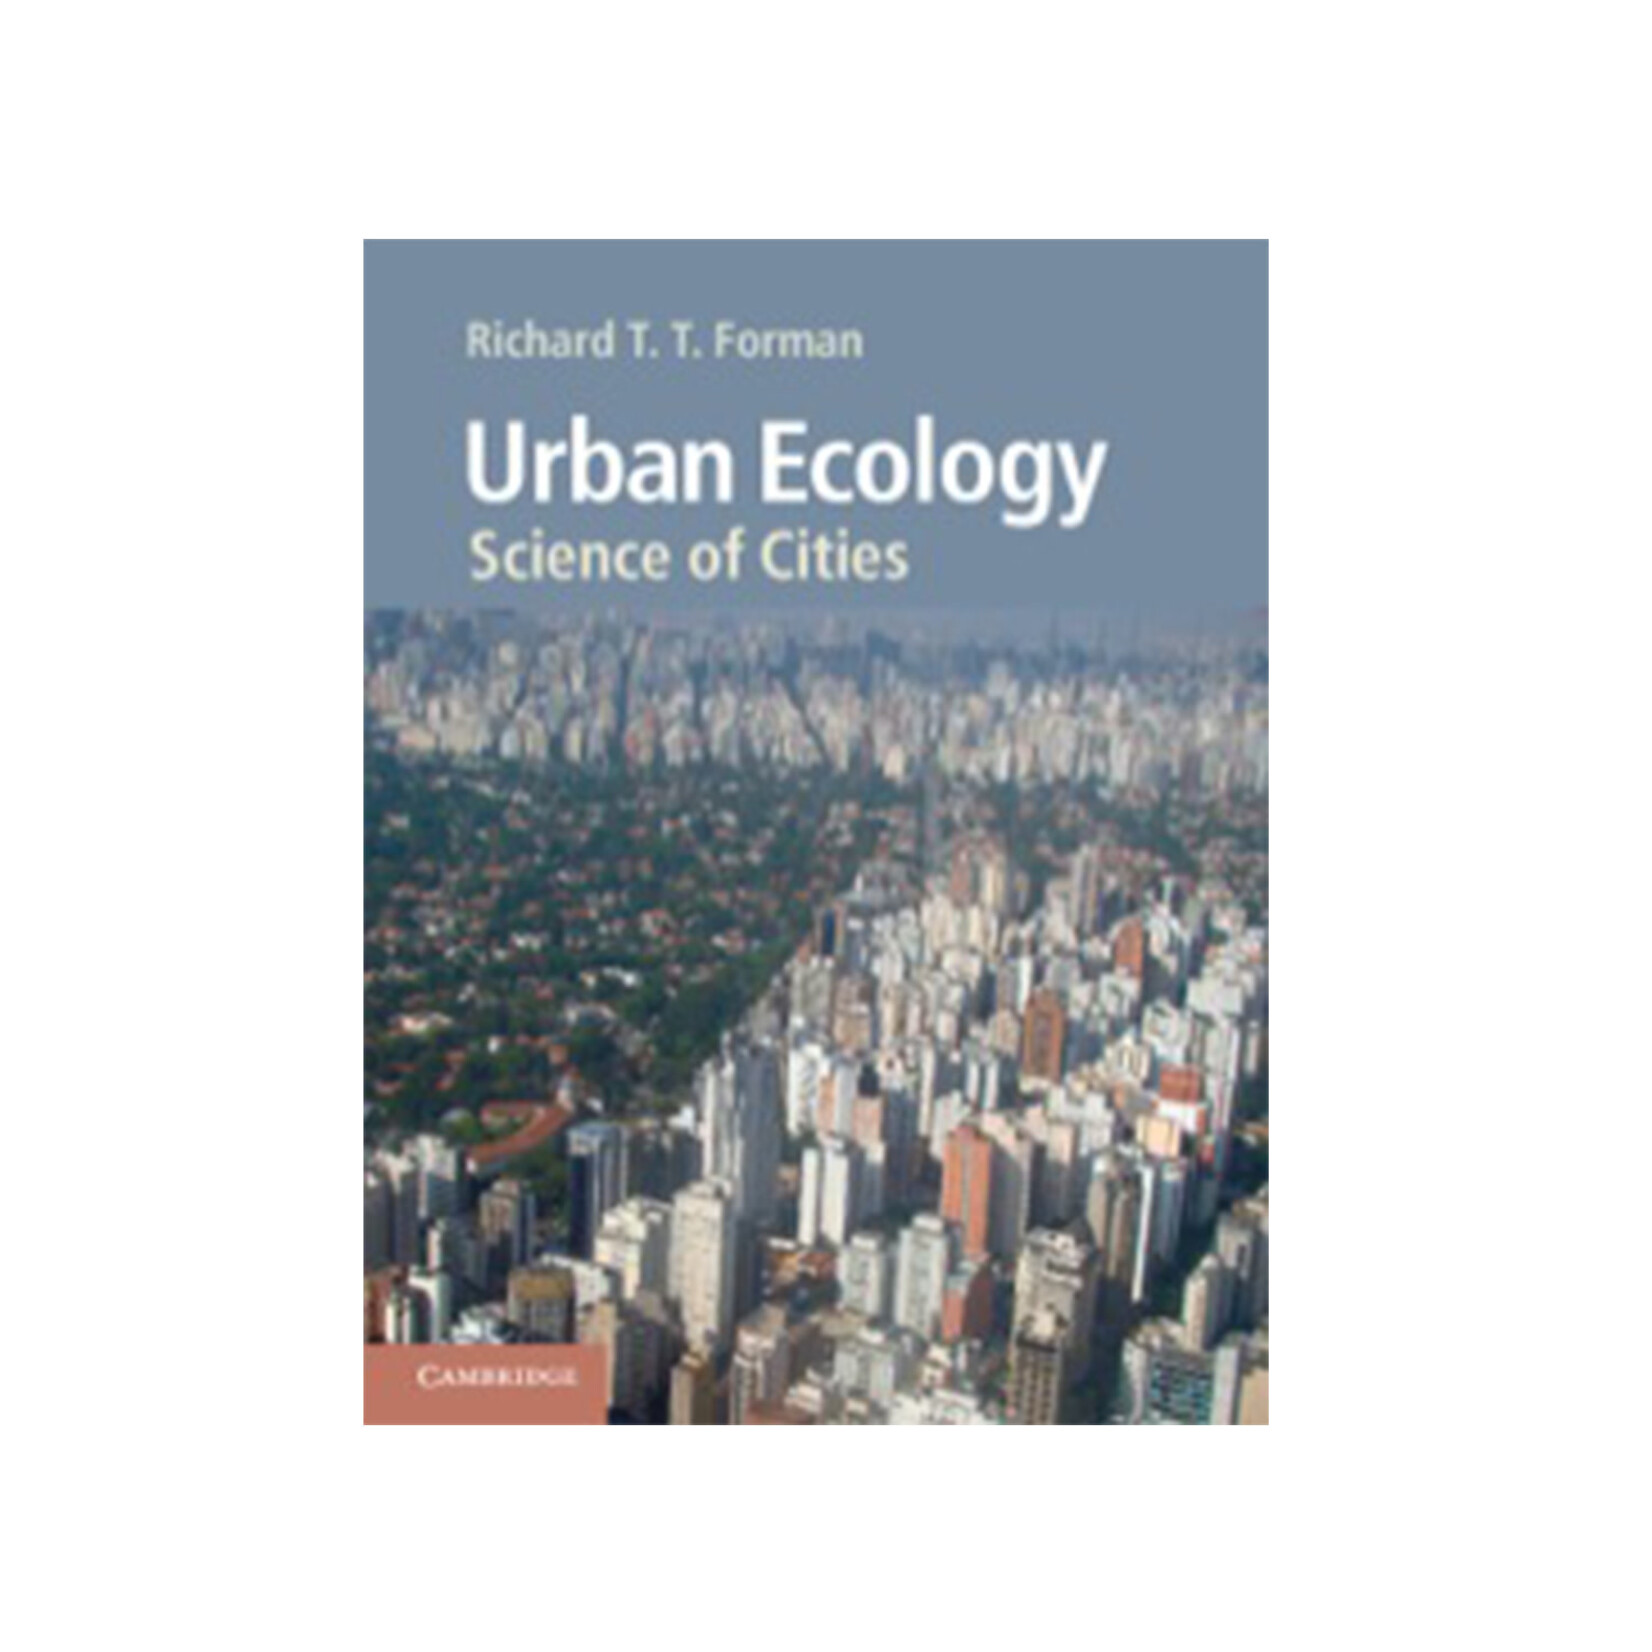 Urban Ecology, Science of Cities